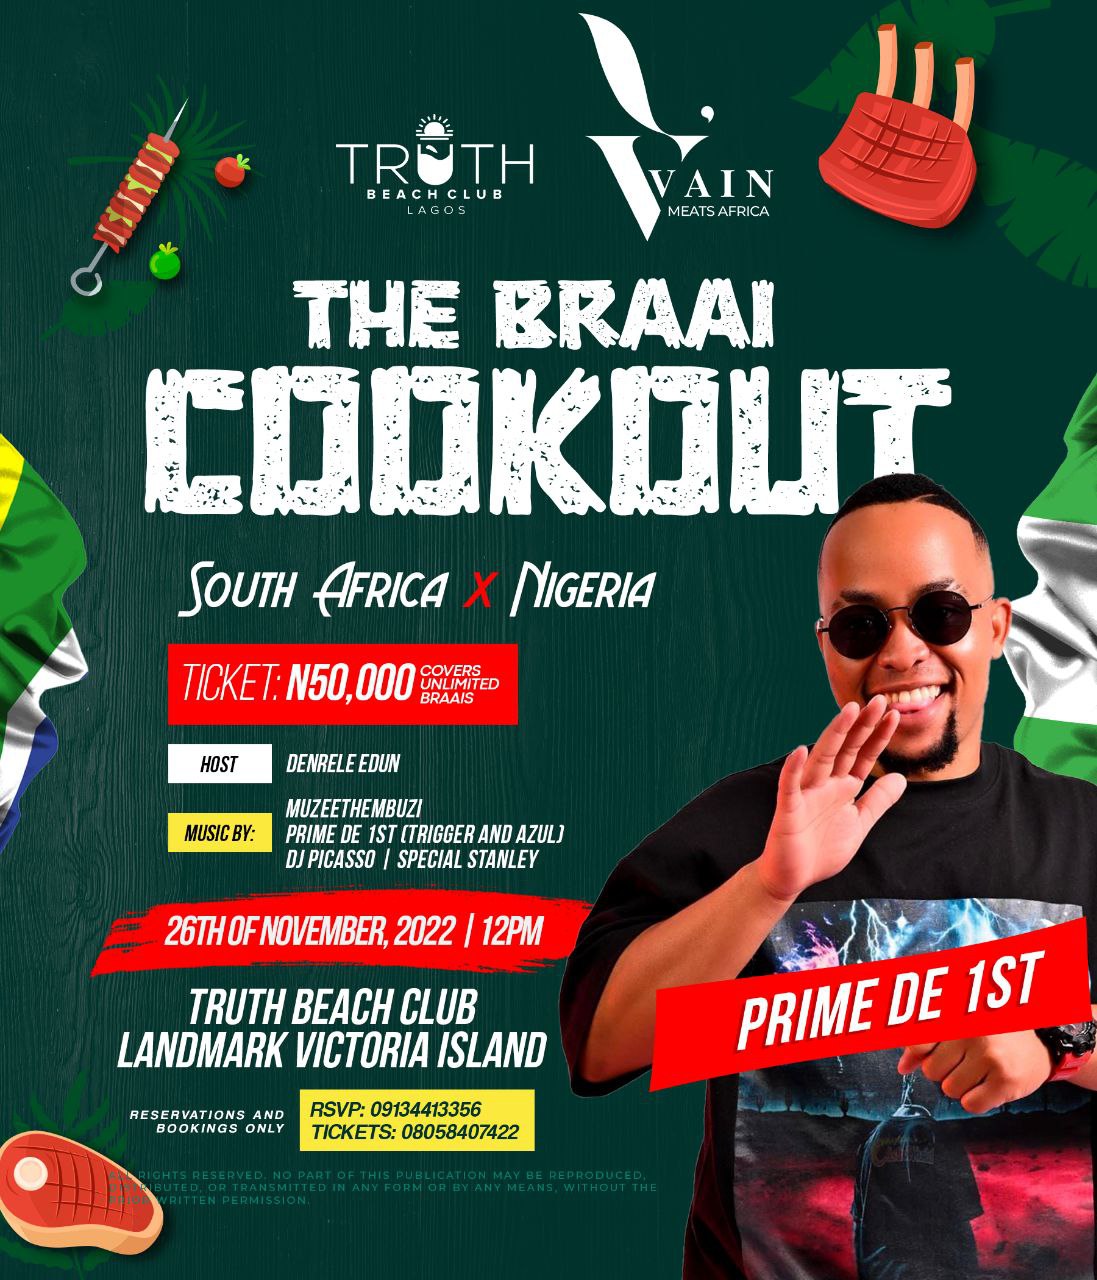 THE BRAAI COOKOUT (South Africa X Nigeria) Post free event in Nigeria using tickethub.ng, buy and sell tickets to event